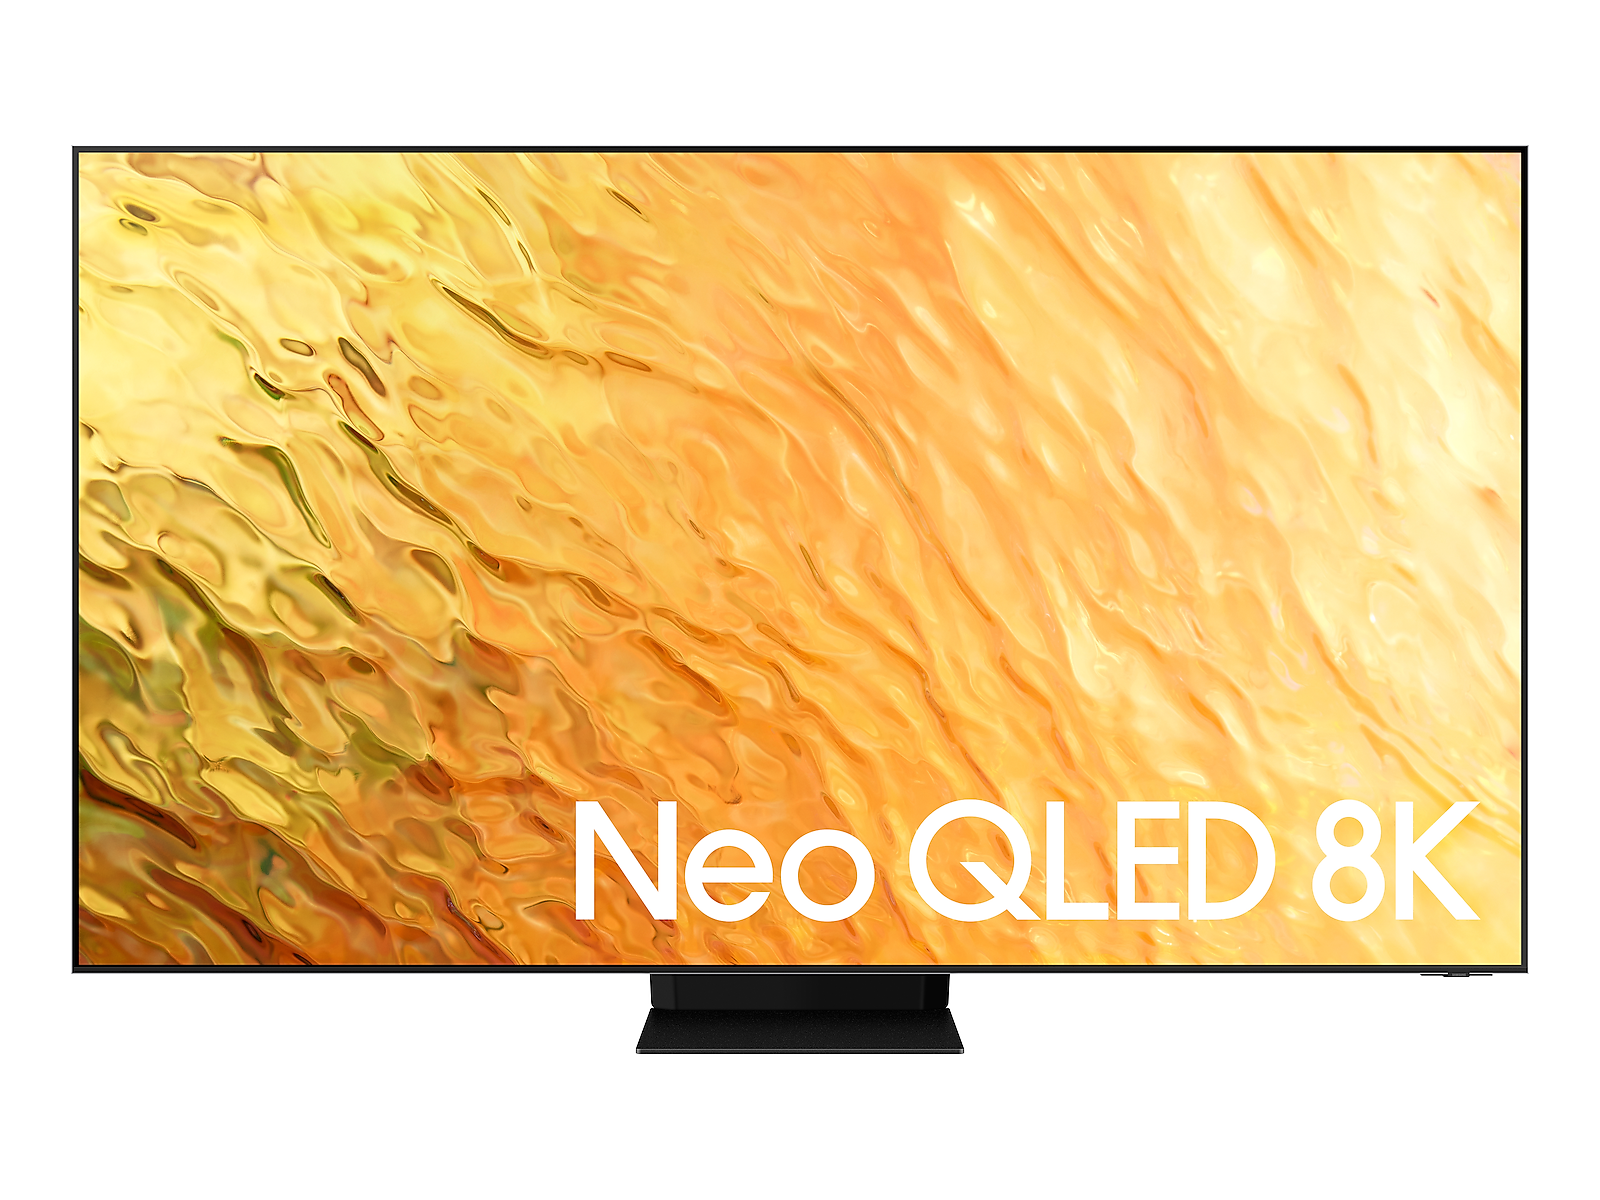 65" Class QN800B Samsung Neo QLED 8K Smart TV in Stainless Steel (2022)